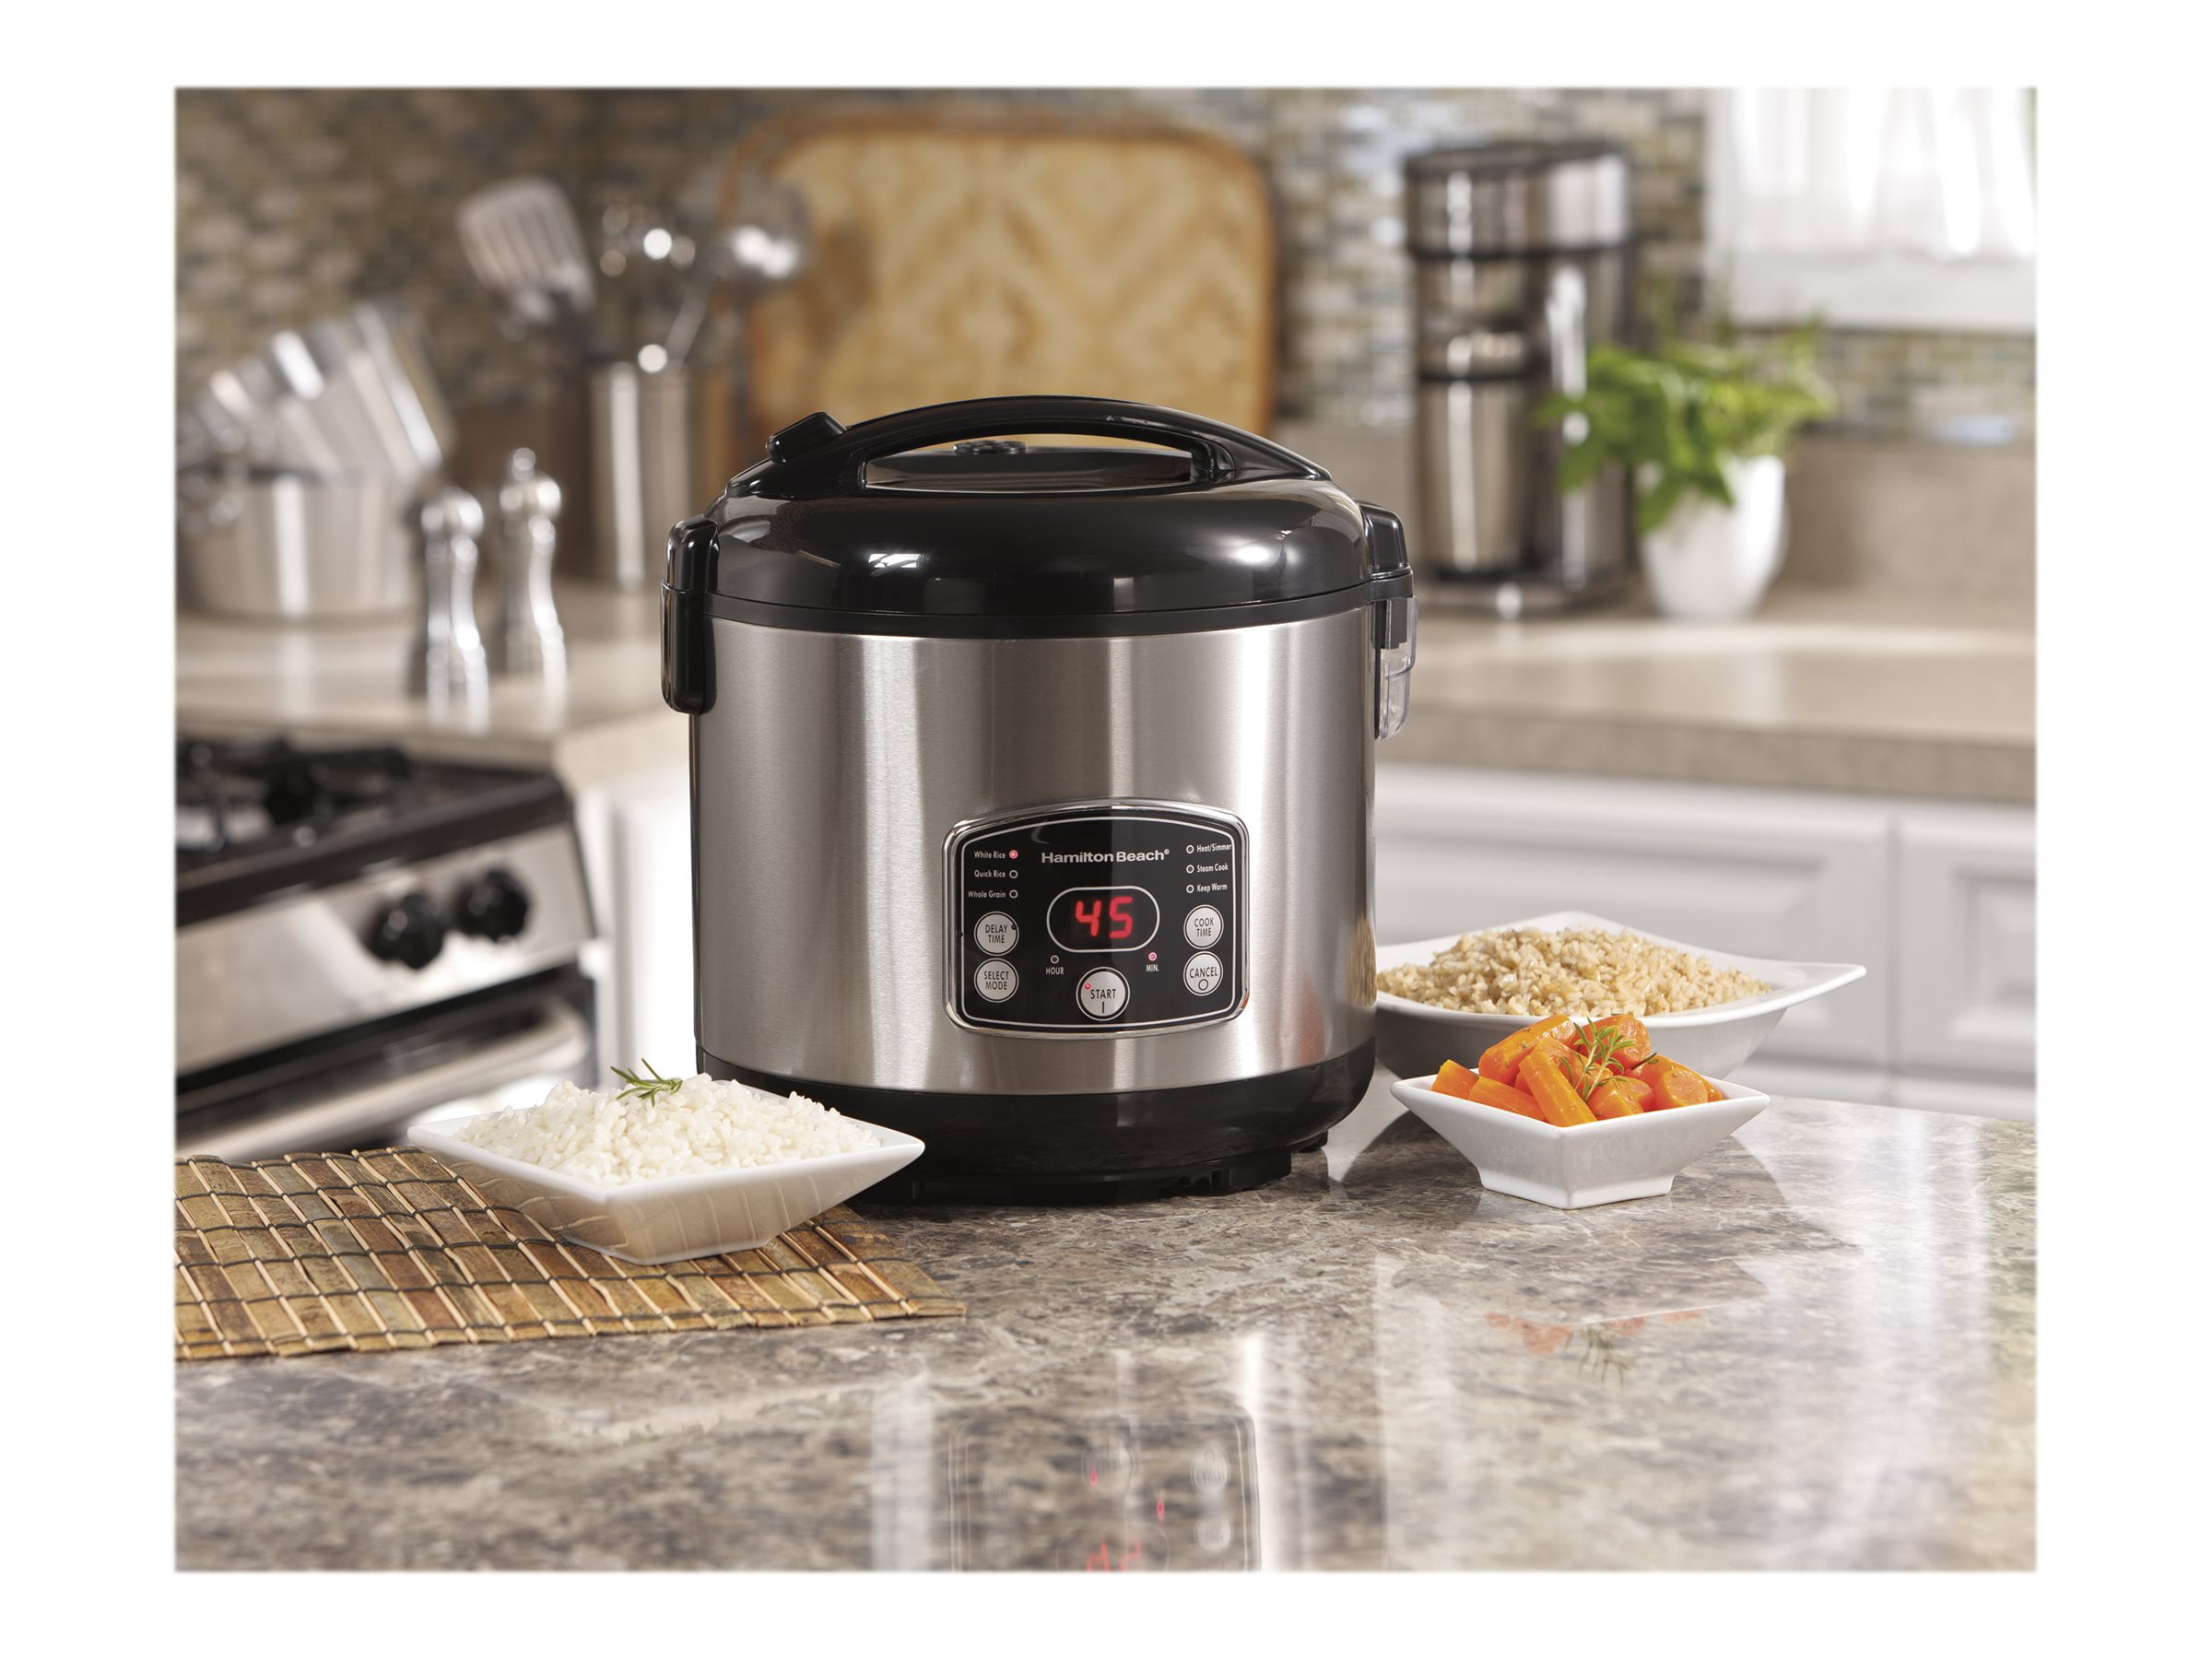  Hamilton Beach Digital Programmable Rice Cooker & Food Steamer,12  Cups Cooked (6 Uncooked), with Slow Cook & Hard-Boiled Egg Functions, Steam  & Rinse Basket, Blue (37561): Home & Kitchen